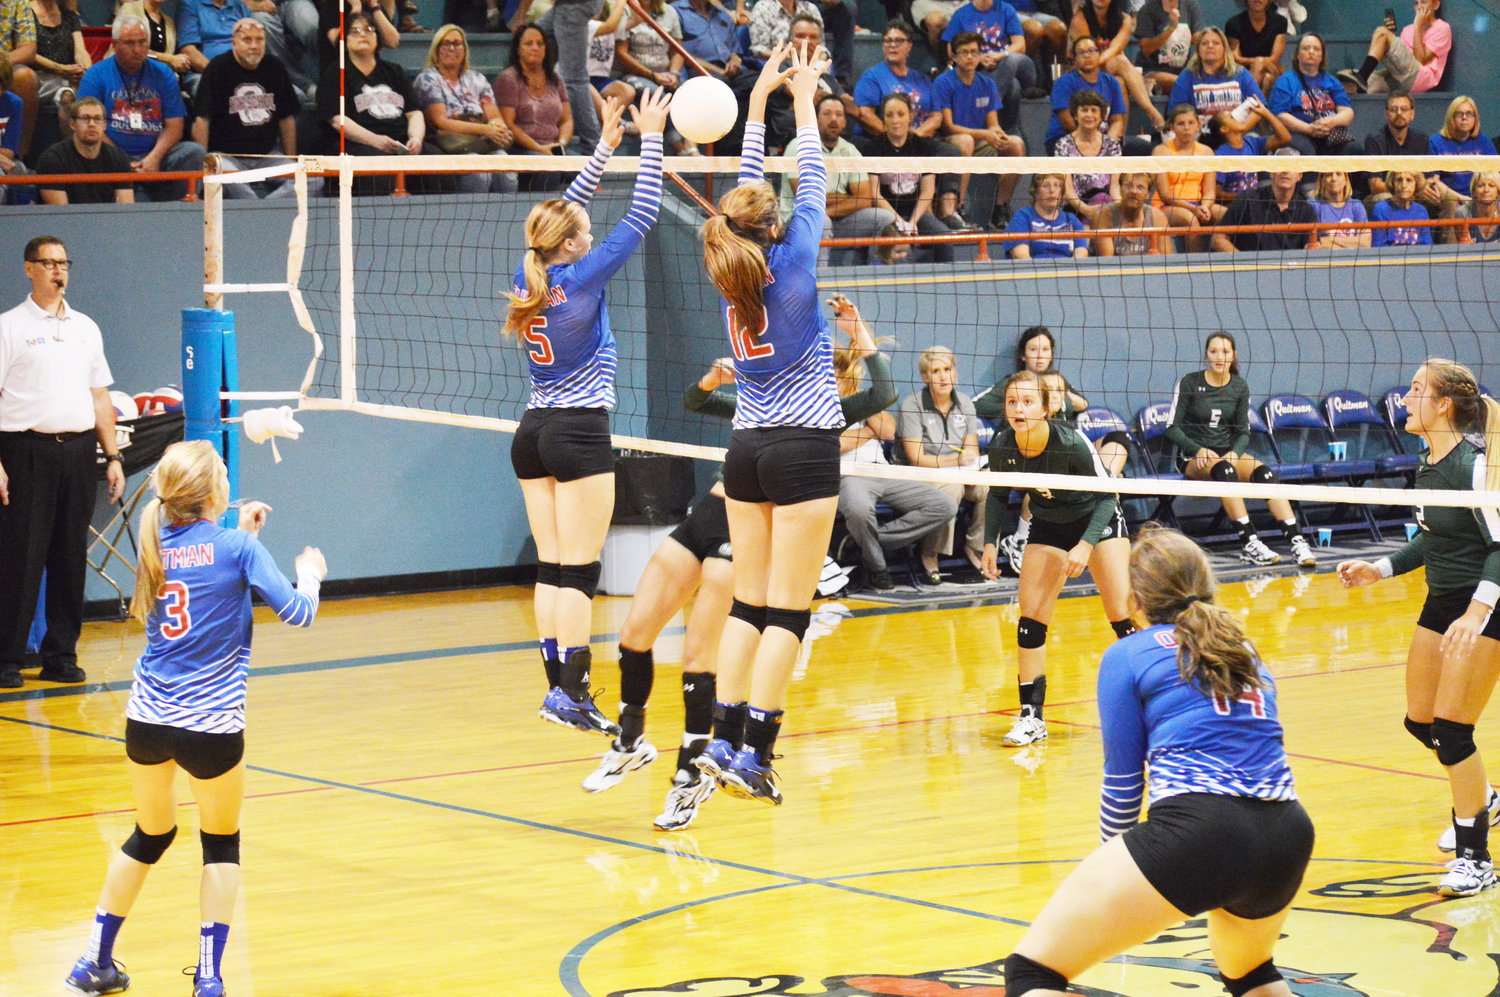 Madalyn Spears (5) and Kaci Raley (12) go up high at the net as Brittany Walls (3) and Cammie Hicks (14) prepare to back them up. (Monitor photo by Larry Tucker)